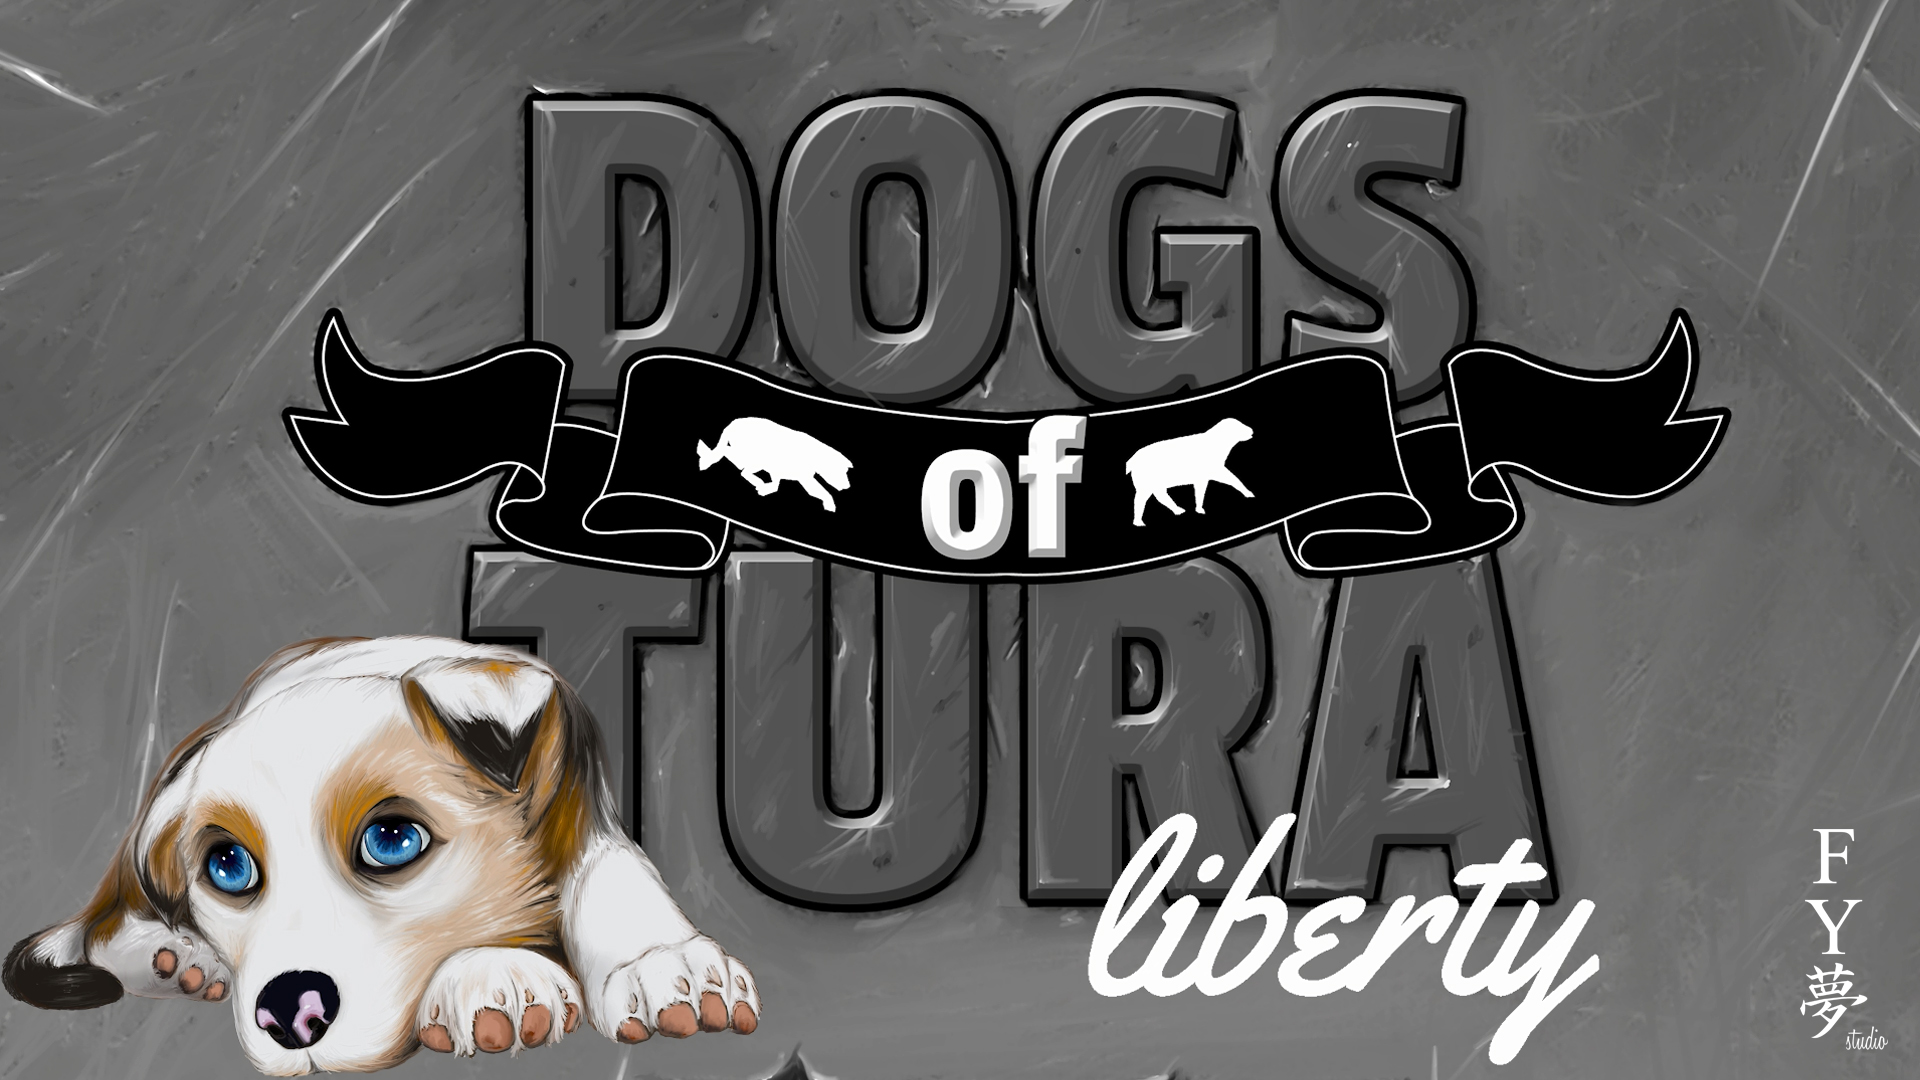 DOGS of TURA